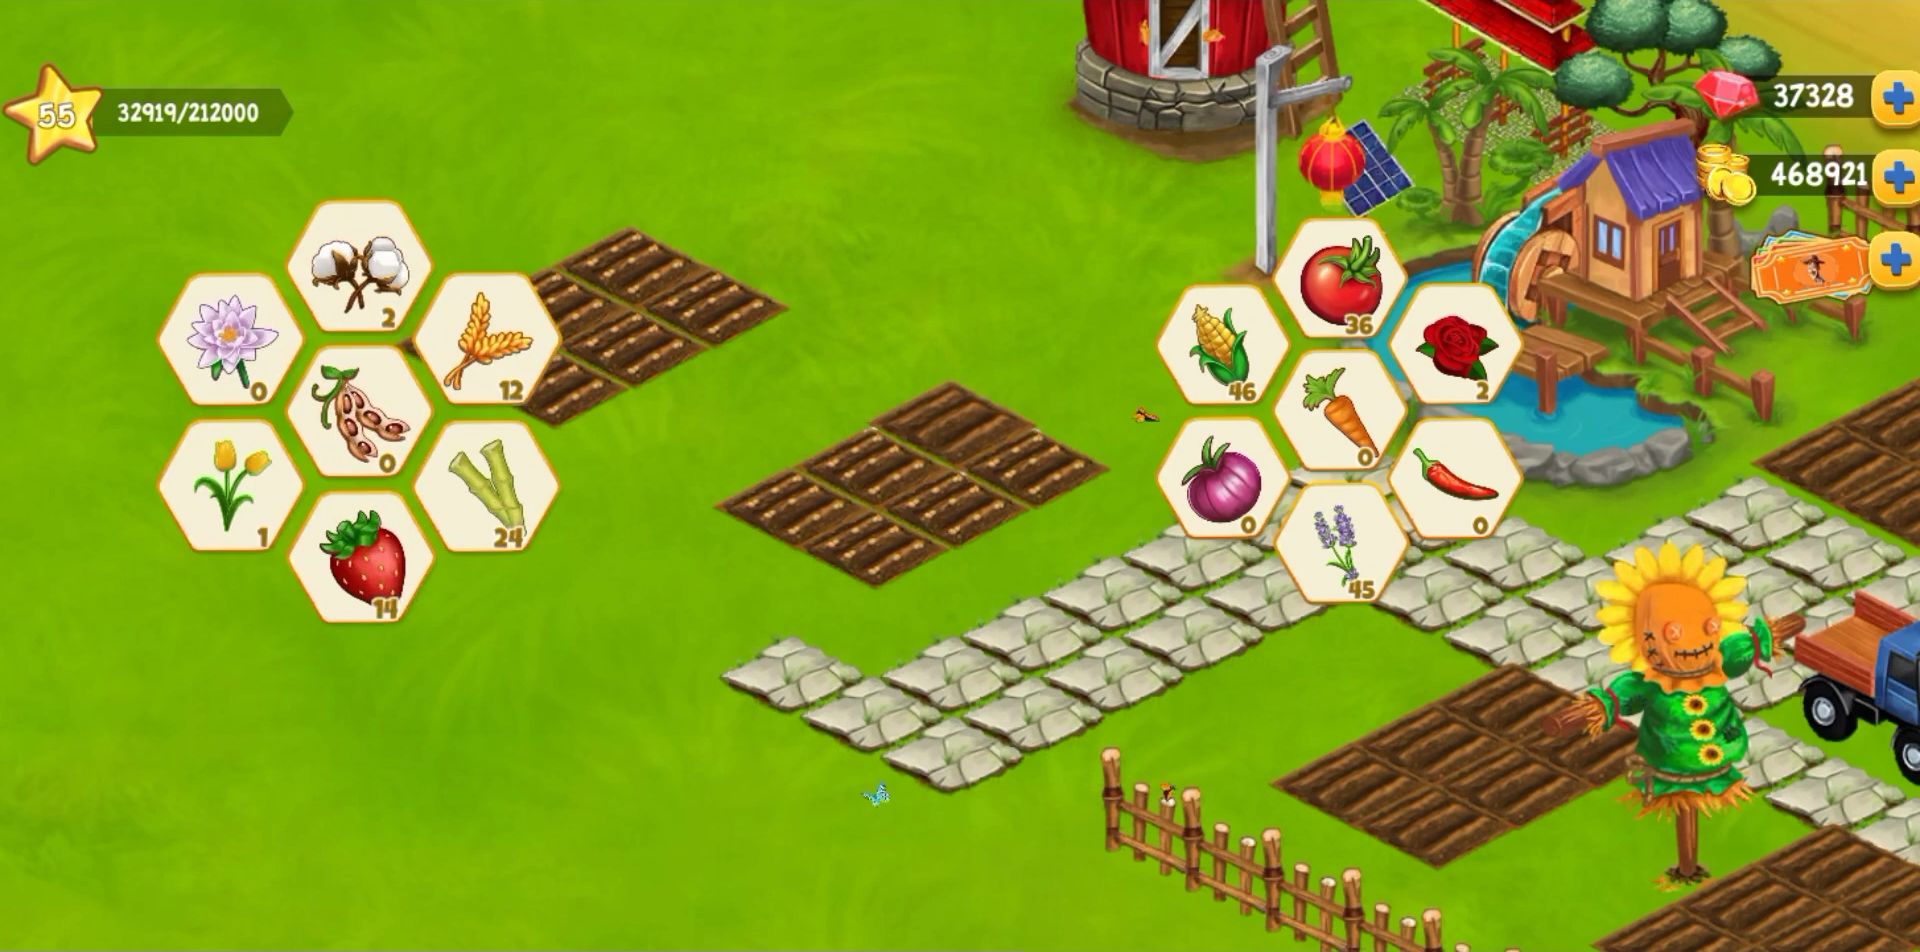 Farm Day Village Farming: Offline Games for Android